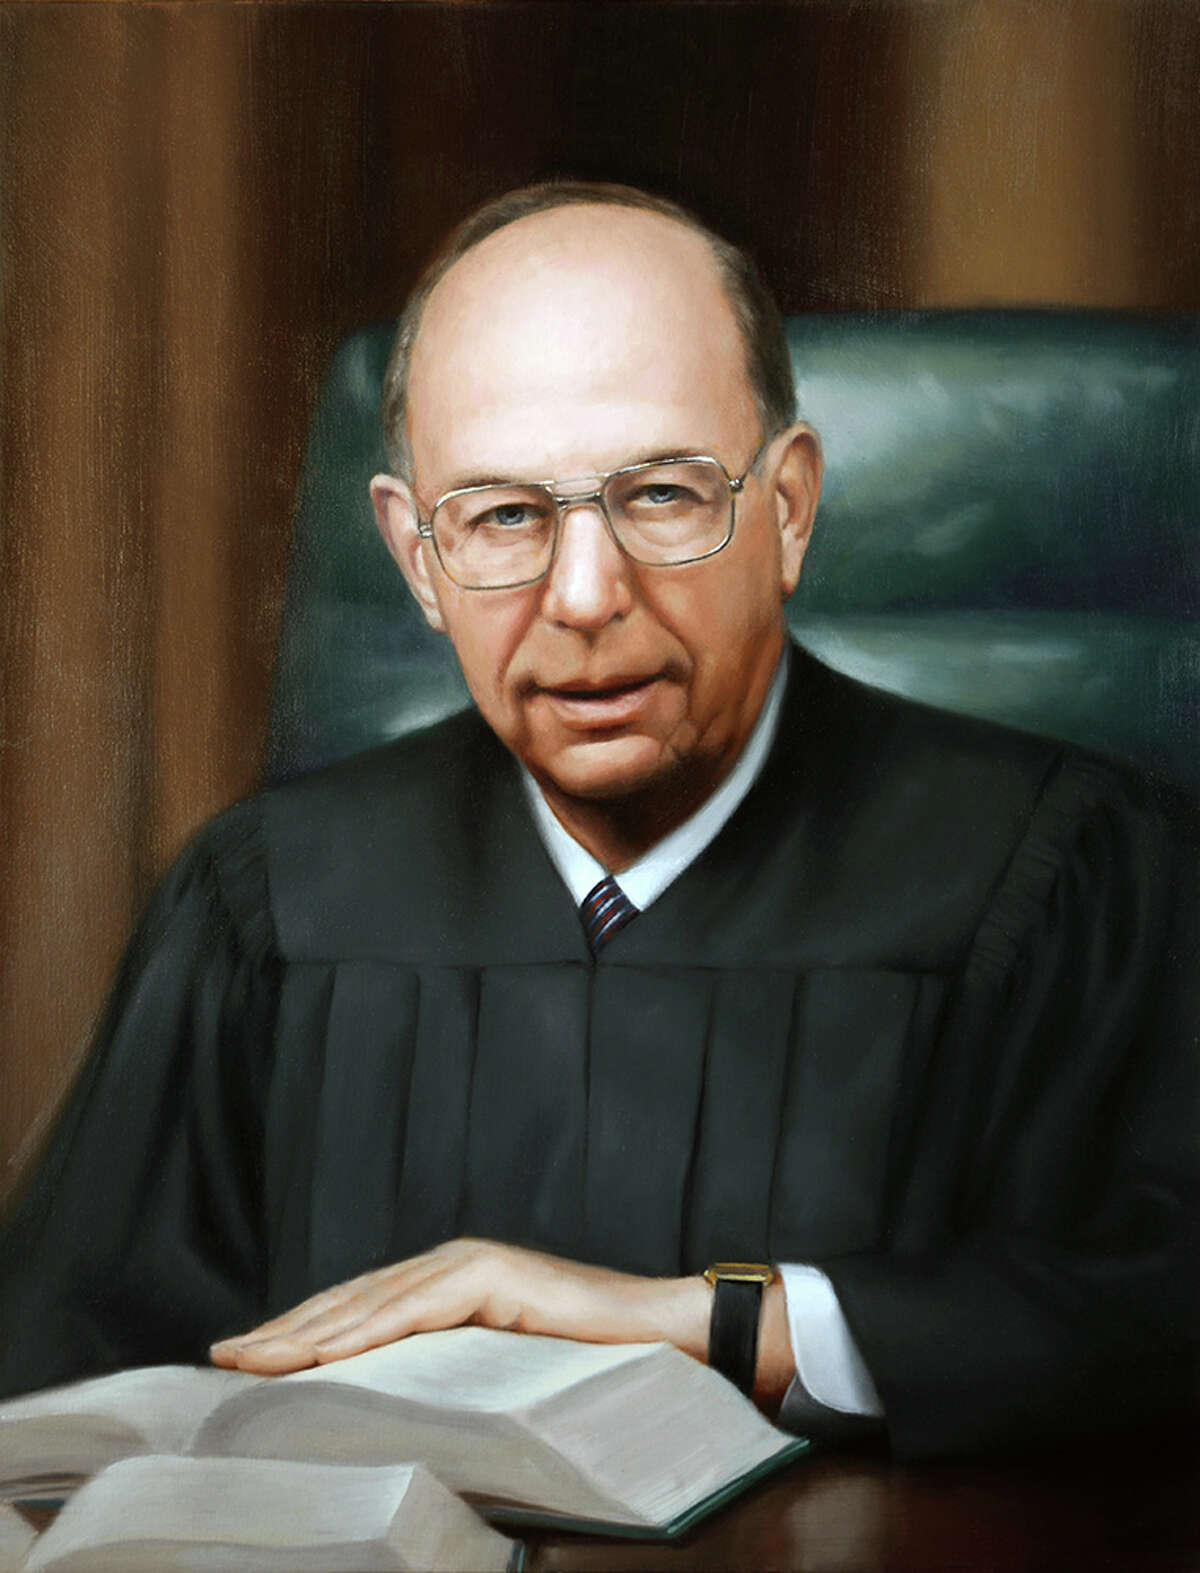 Associate Judge of the Court of Appeals Richard D. Simons. Simons sat on the Court of Appeals for 14 years and briefly served as acting chief judge of the top state court following the resignation of scandal-scarred Sol Wachtler. He died at age 95.